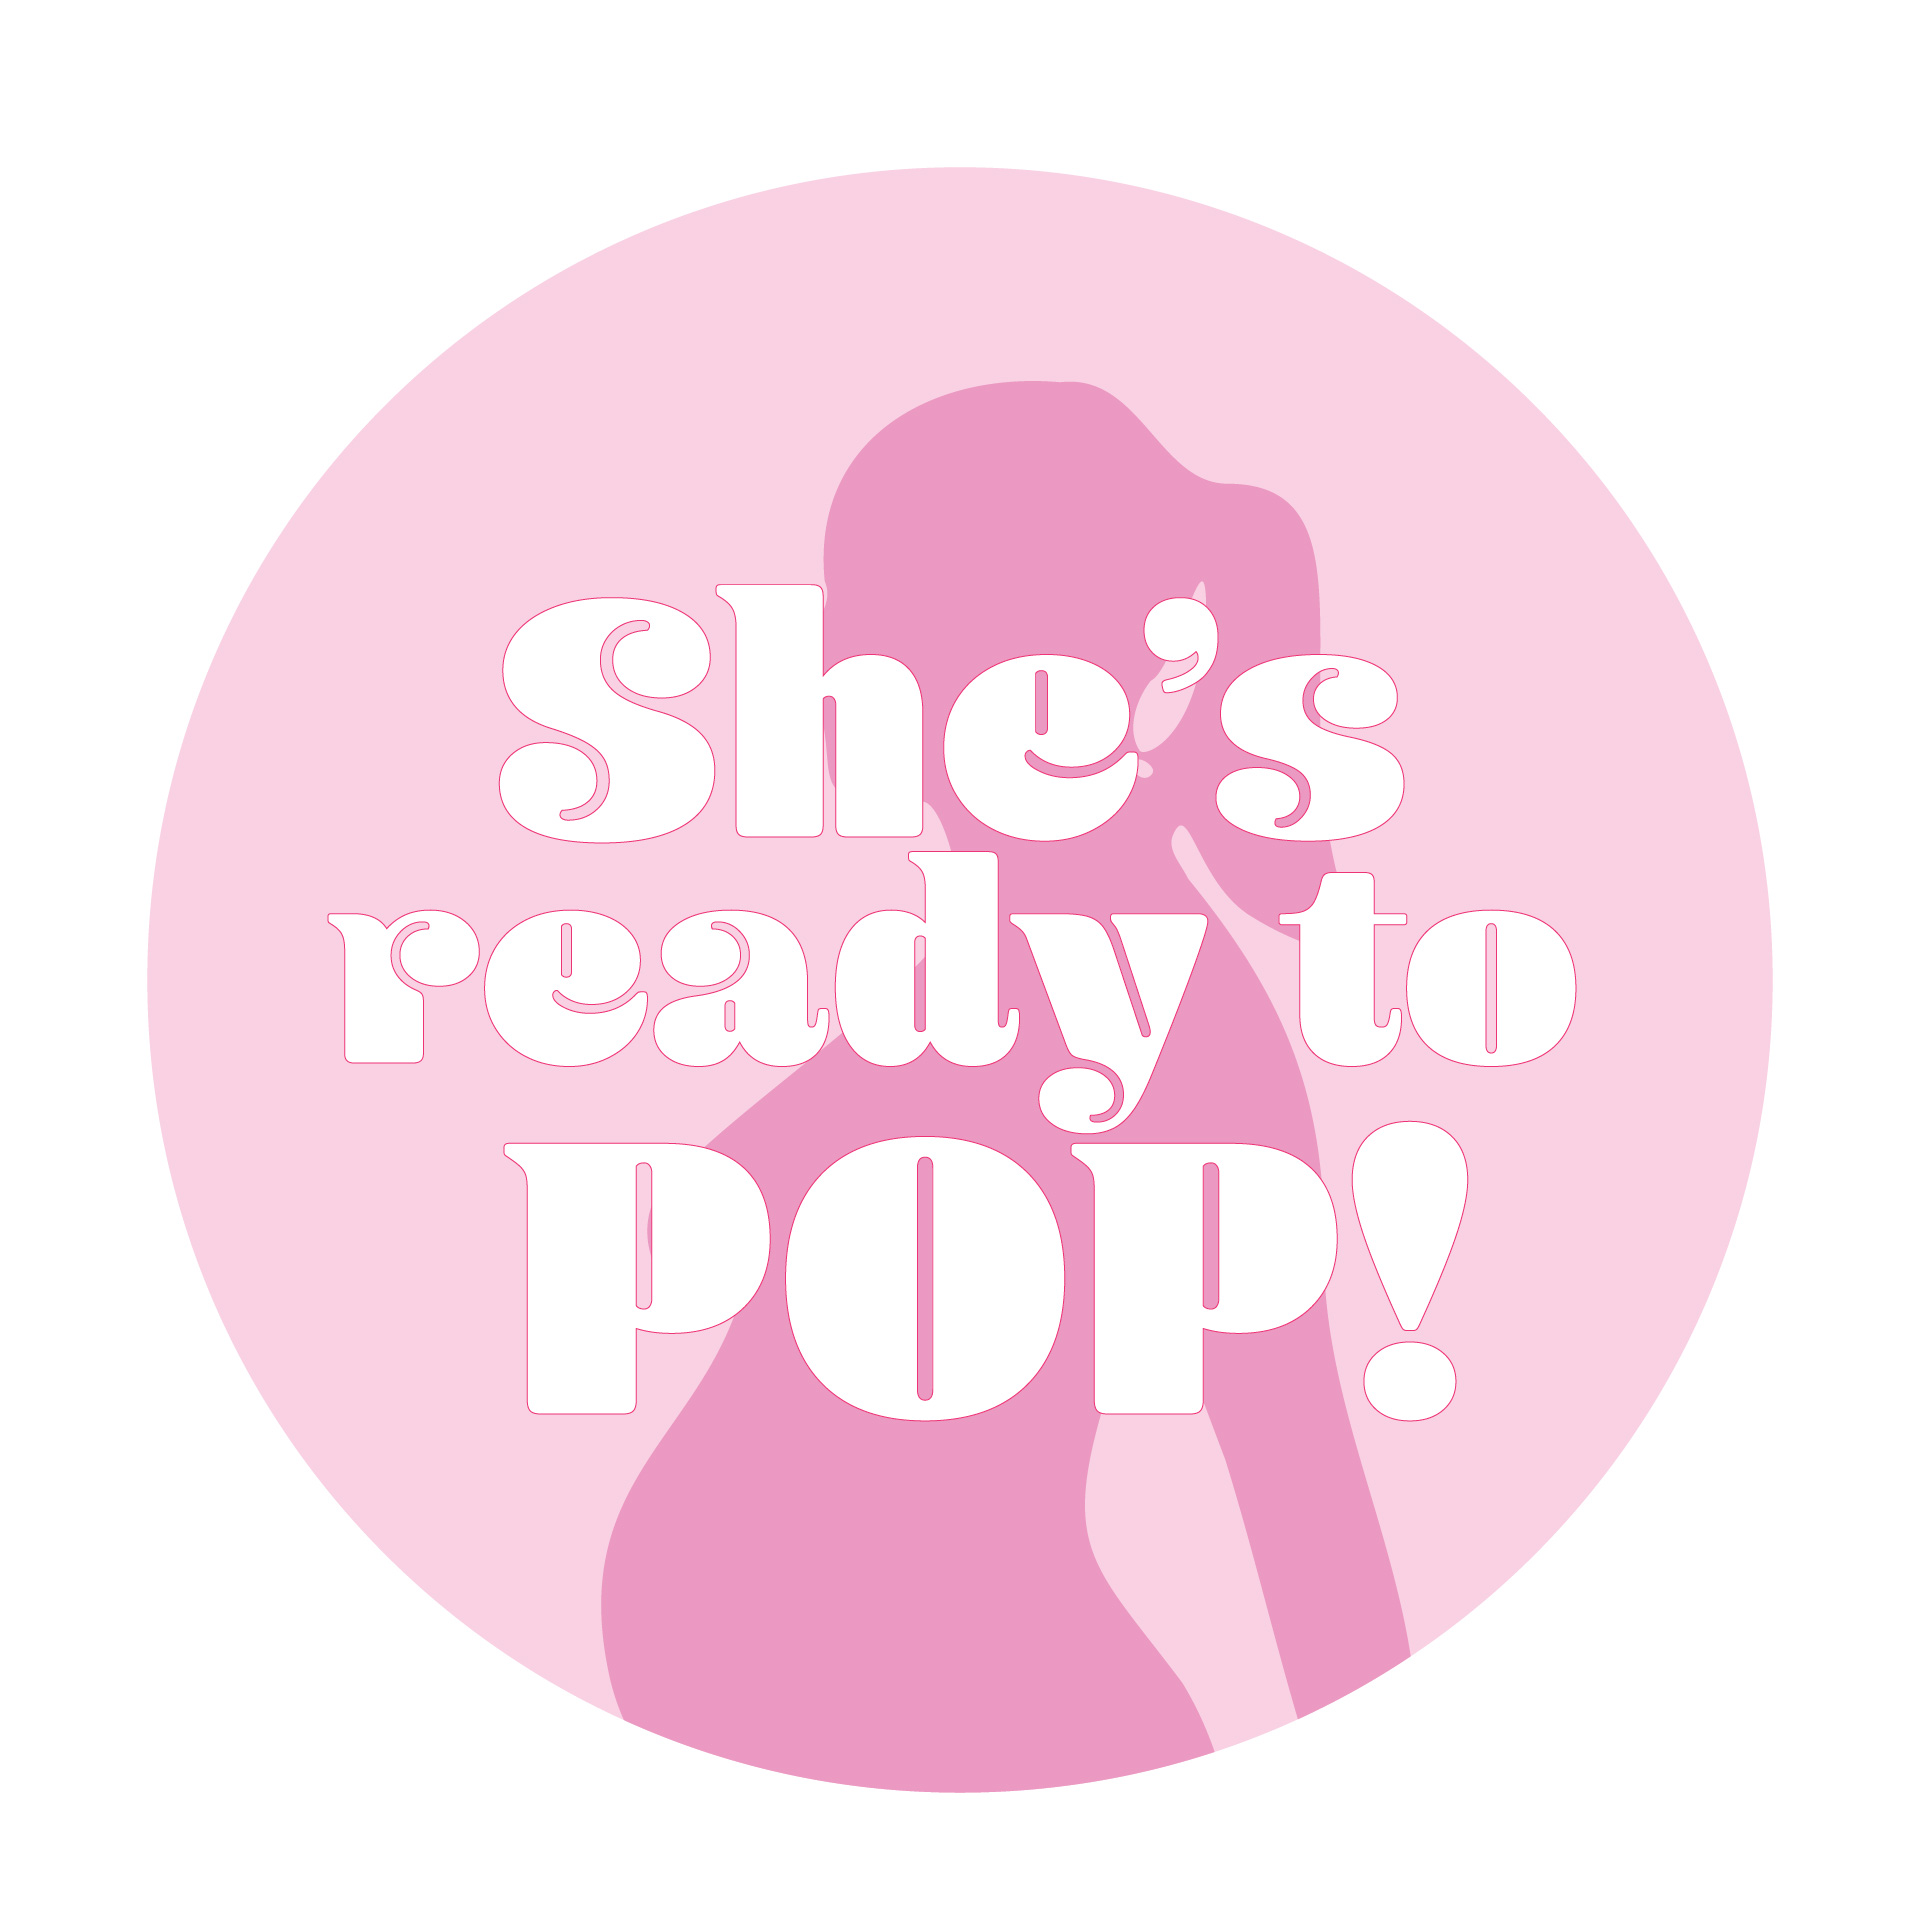 Ready to Pop Printable Labels Free